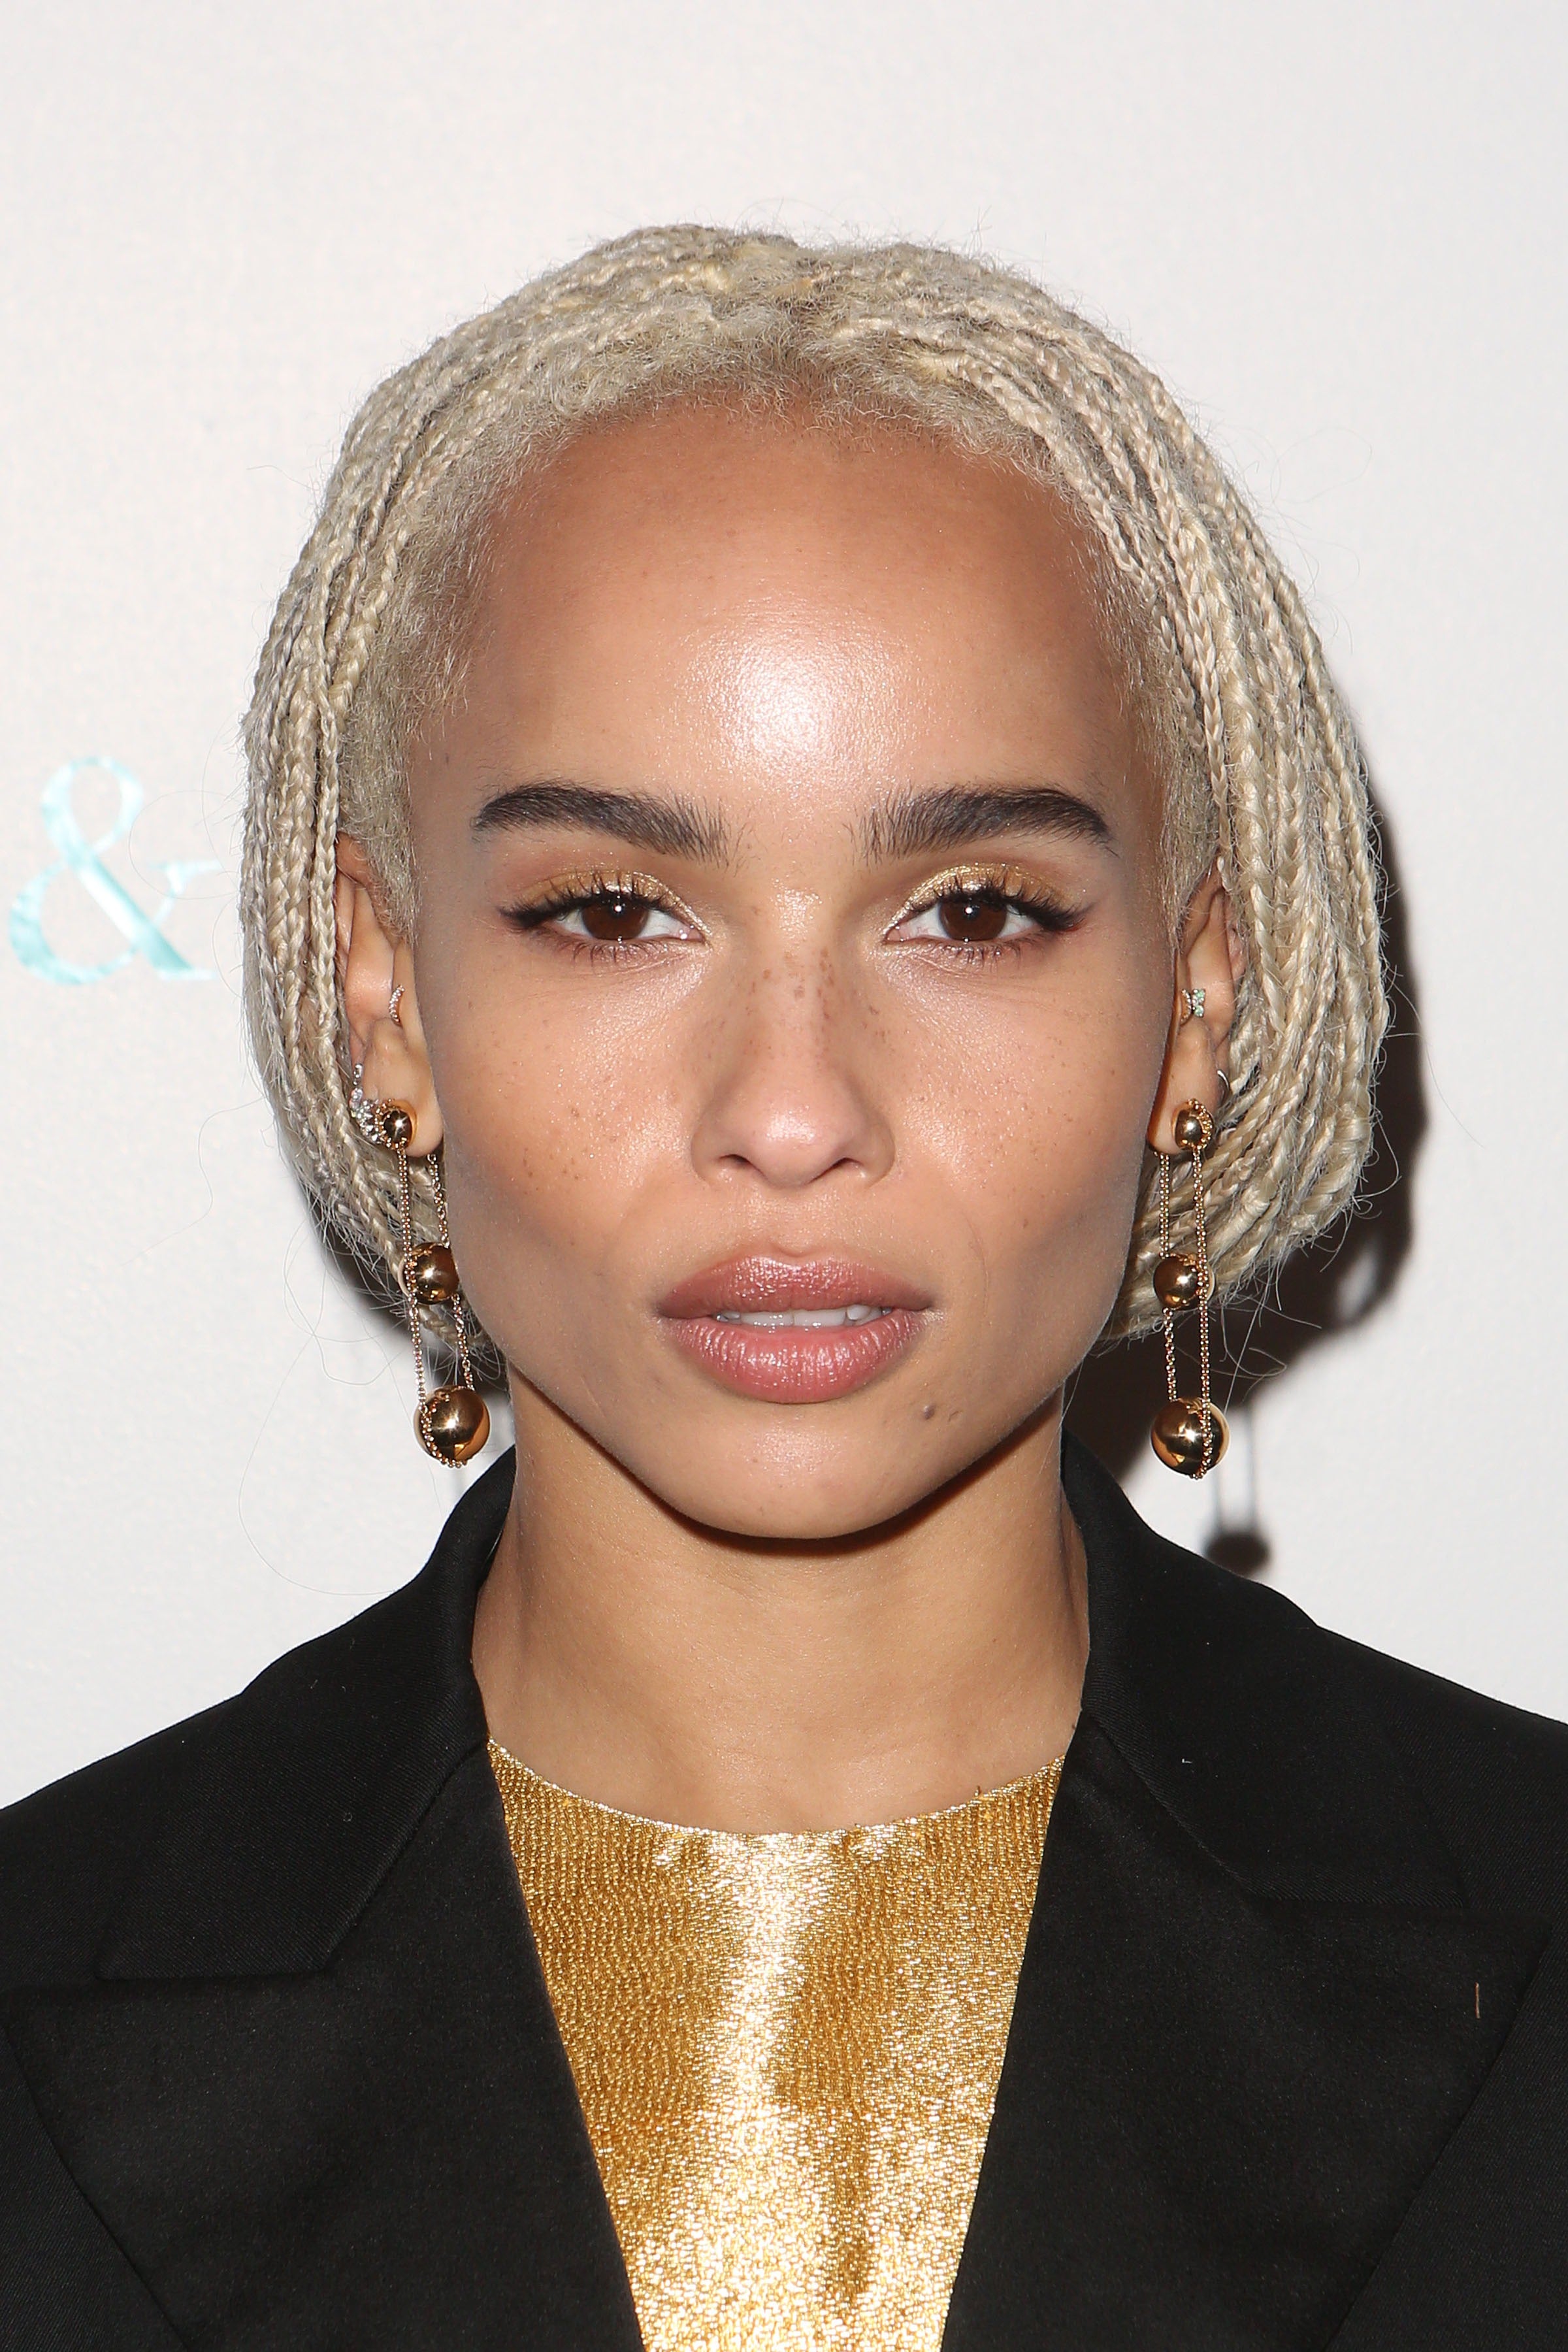 21 Celebrities Who Give Us Serious Eyebrow Envy
